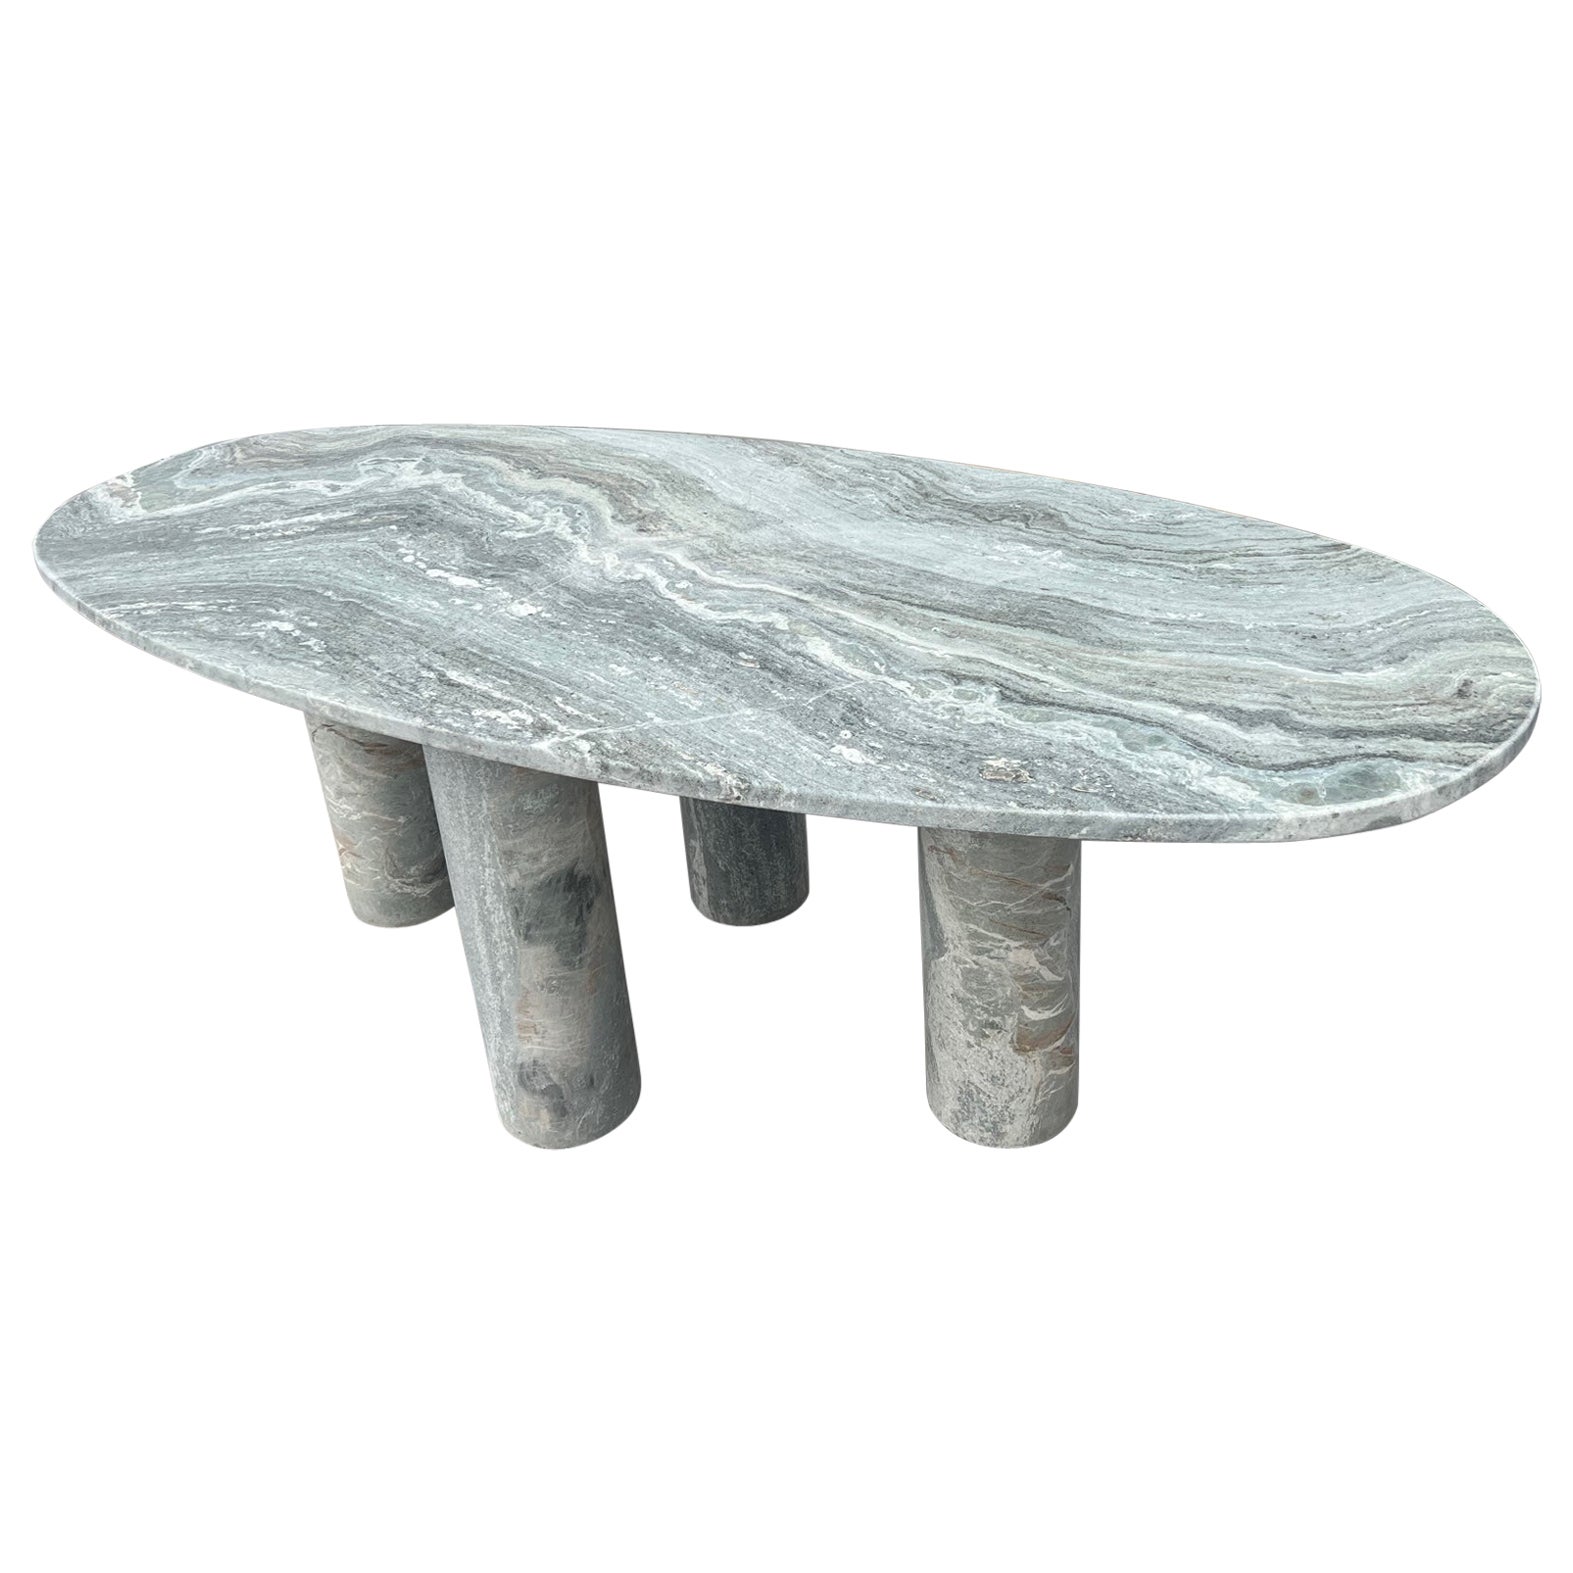 Large Oval Green Marble Dining Table with Column Legs in the style of Bellini 